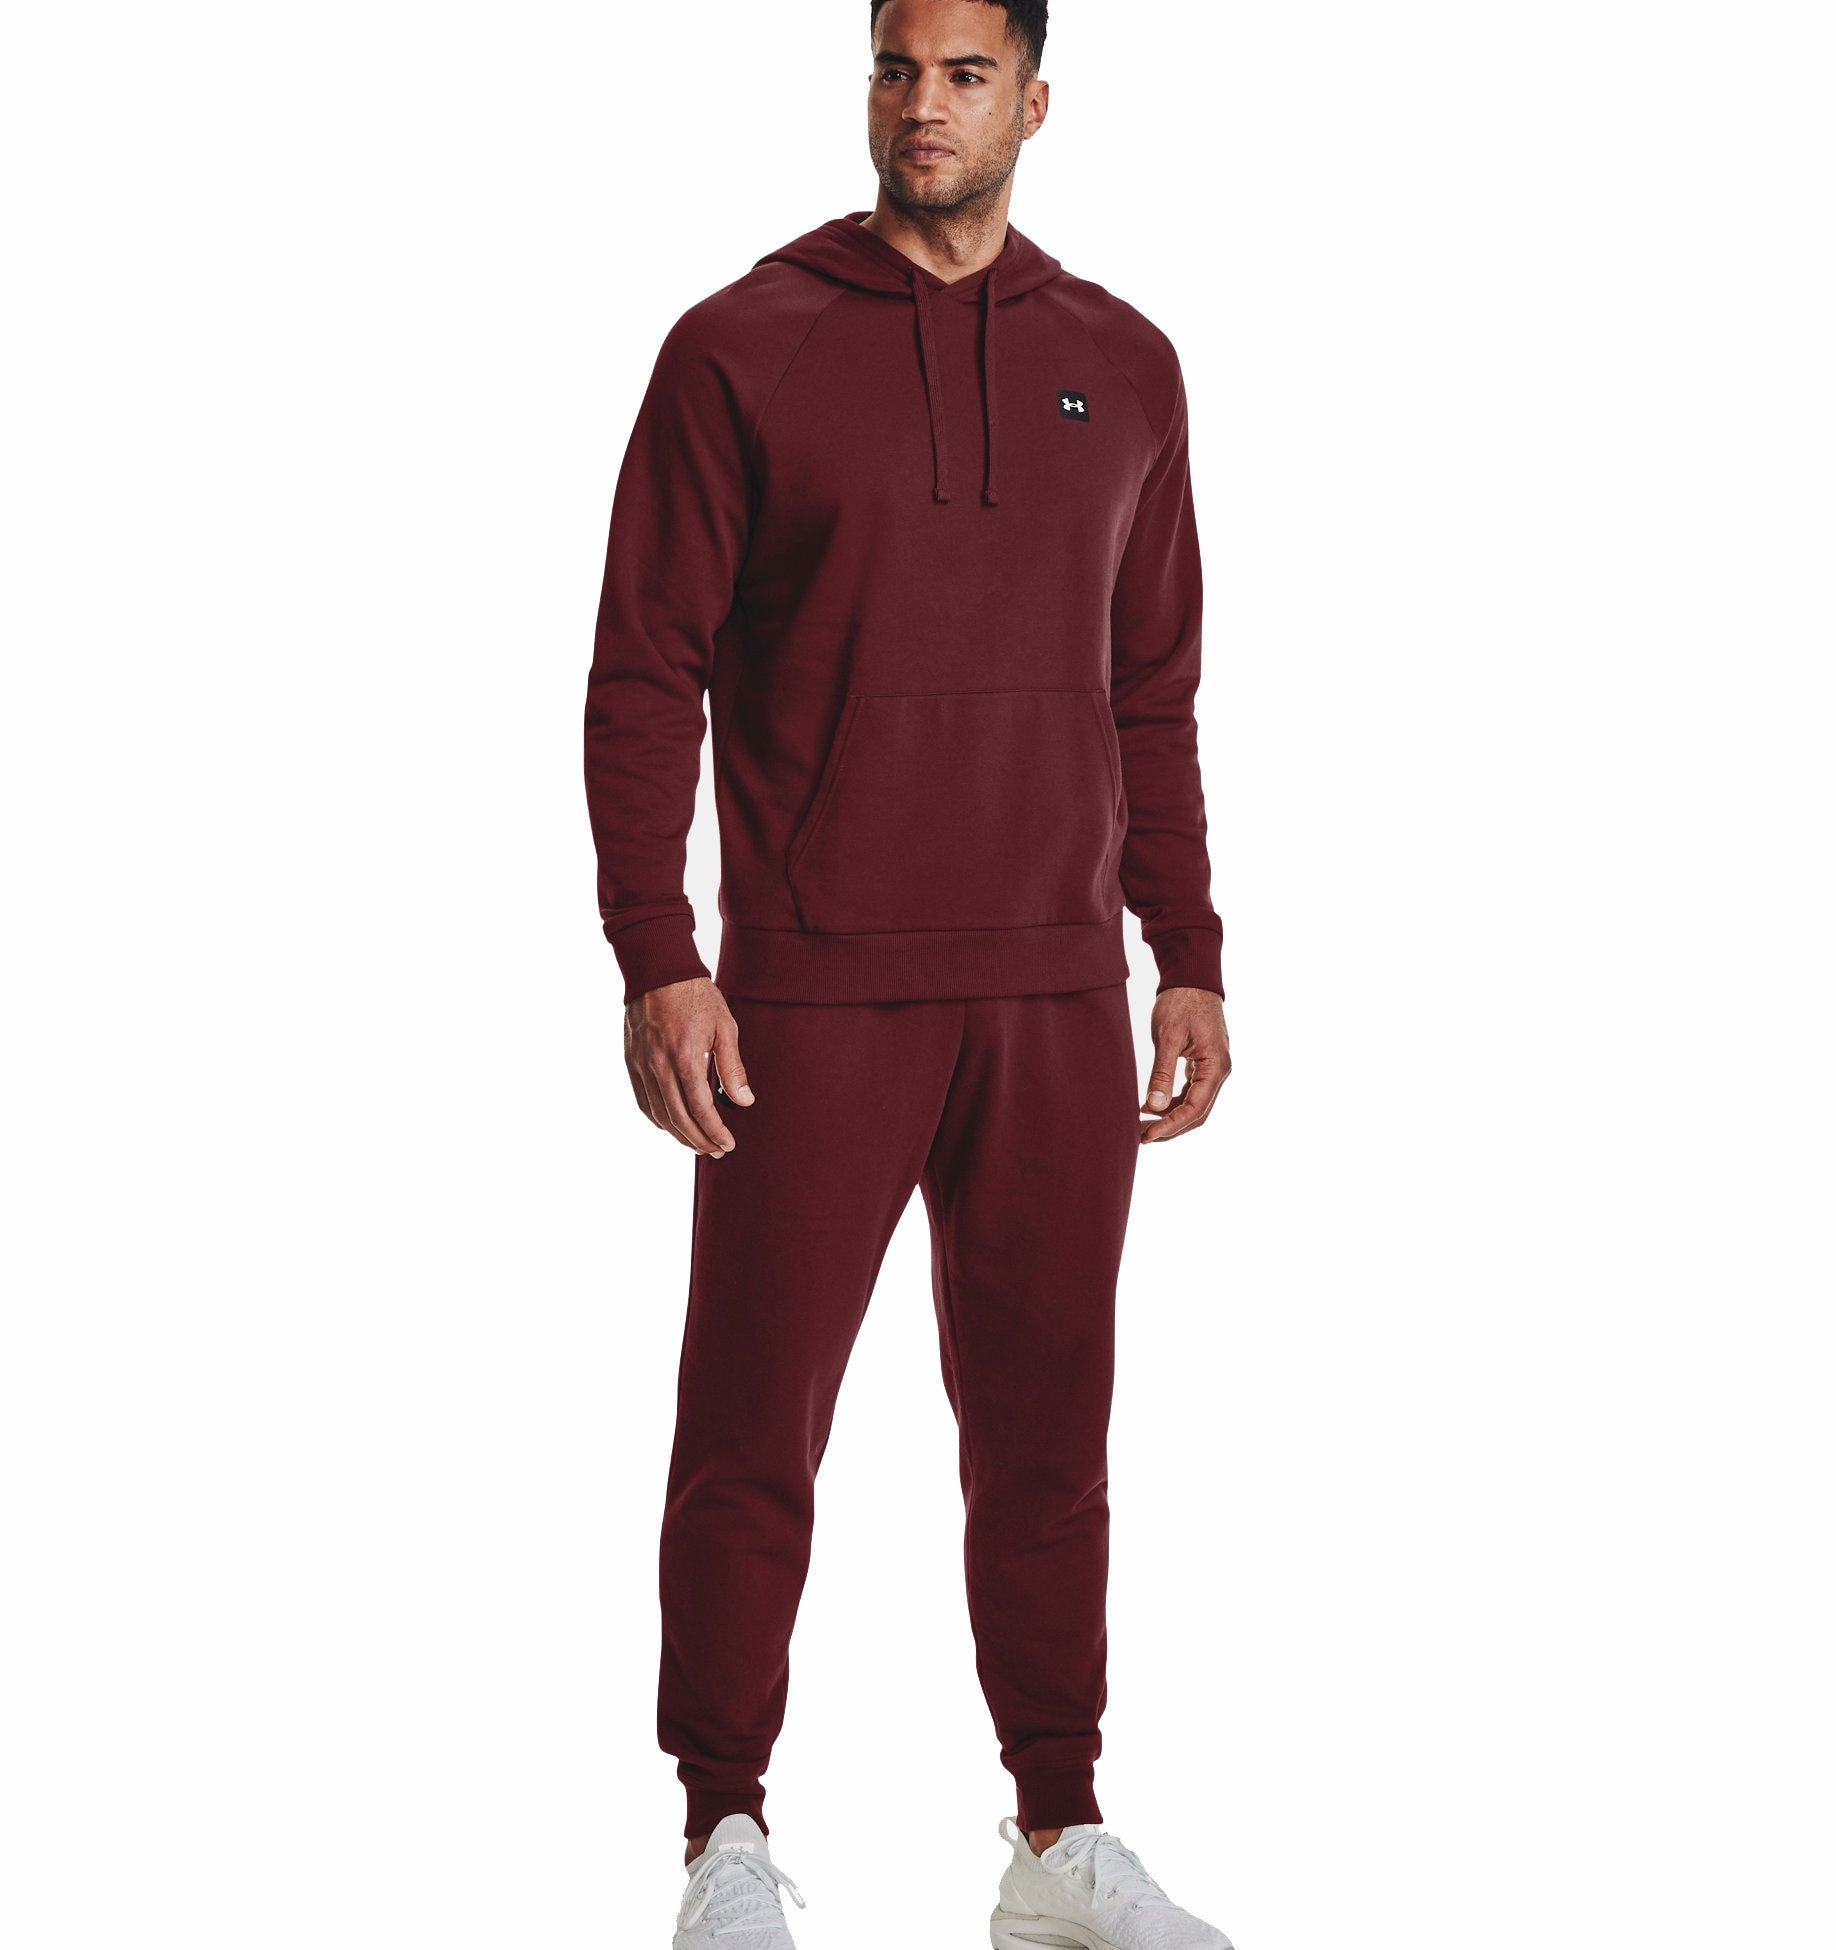 Under Armour Rival Fleece Sweat Pants - Mens - Chestnut Red/Onyx White